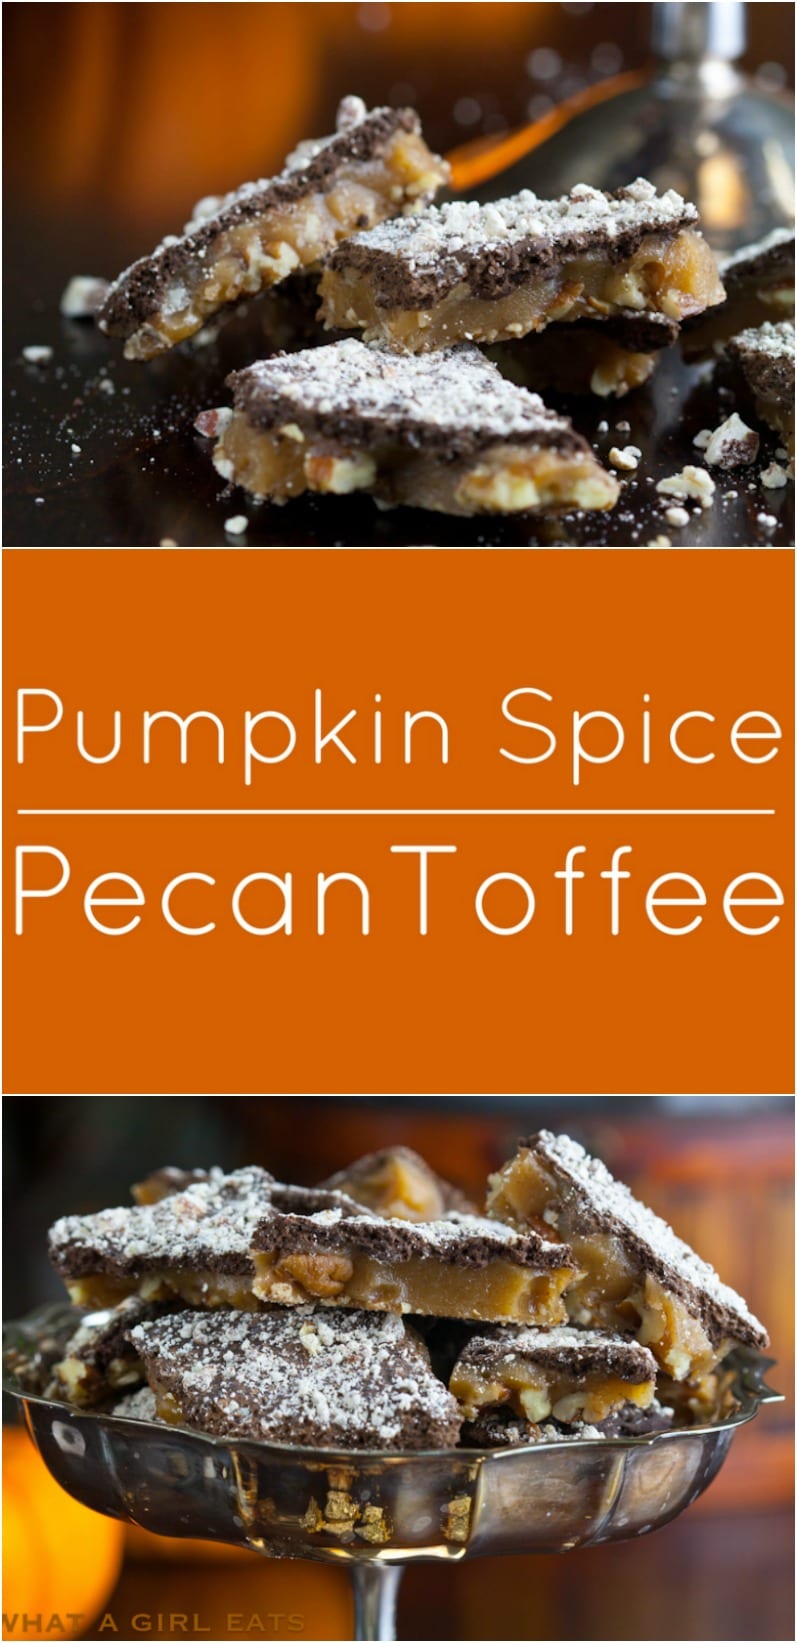 Pumpkin Spice Pecan Toffee. Perfect for autumn!